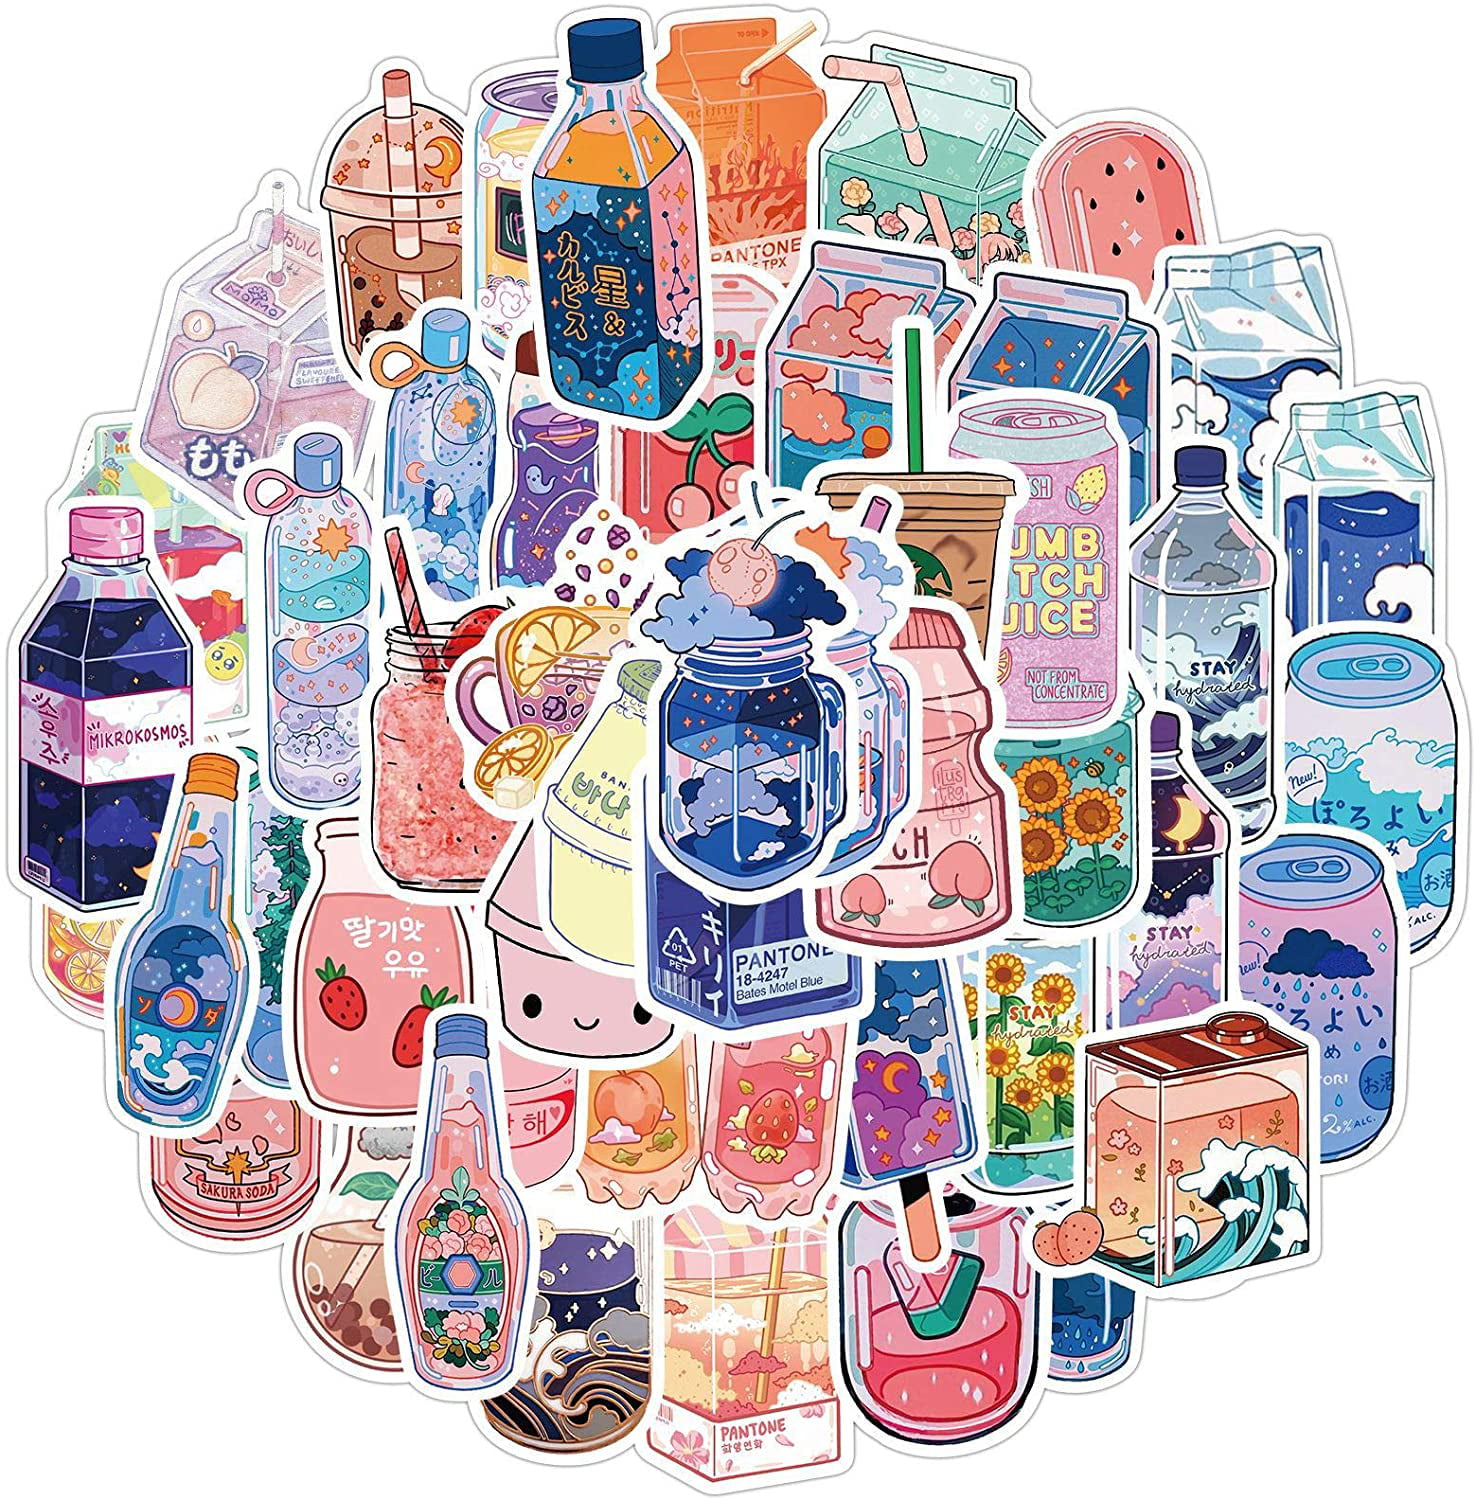 Blue Dog Cute Stickers for Water Bottles 52 Pcs Vinyl Waterproof Bluey Stickers for Teens Kids Girls and Boys Laptop Bumper Phone Guitar Luggage 